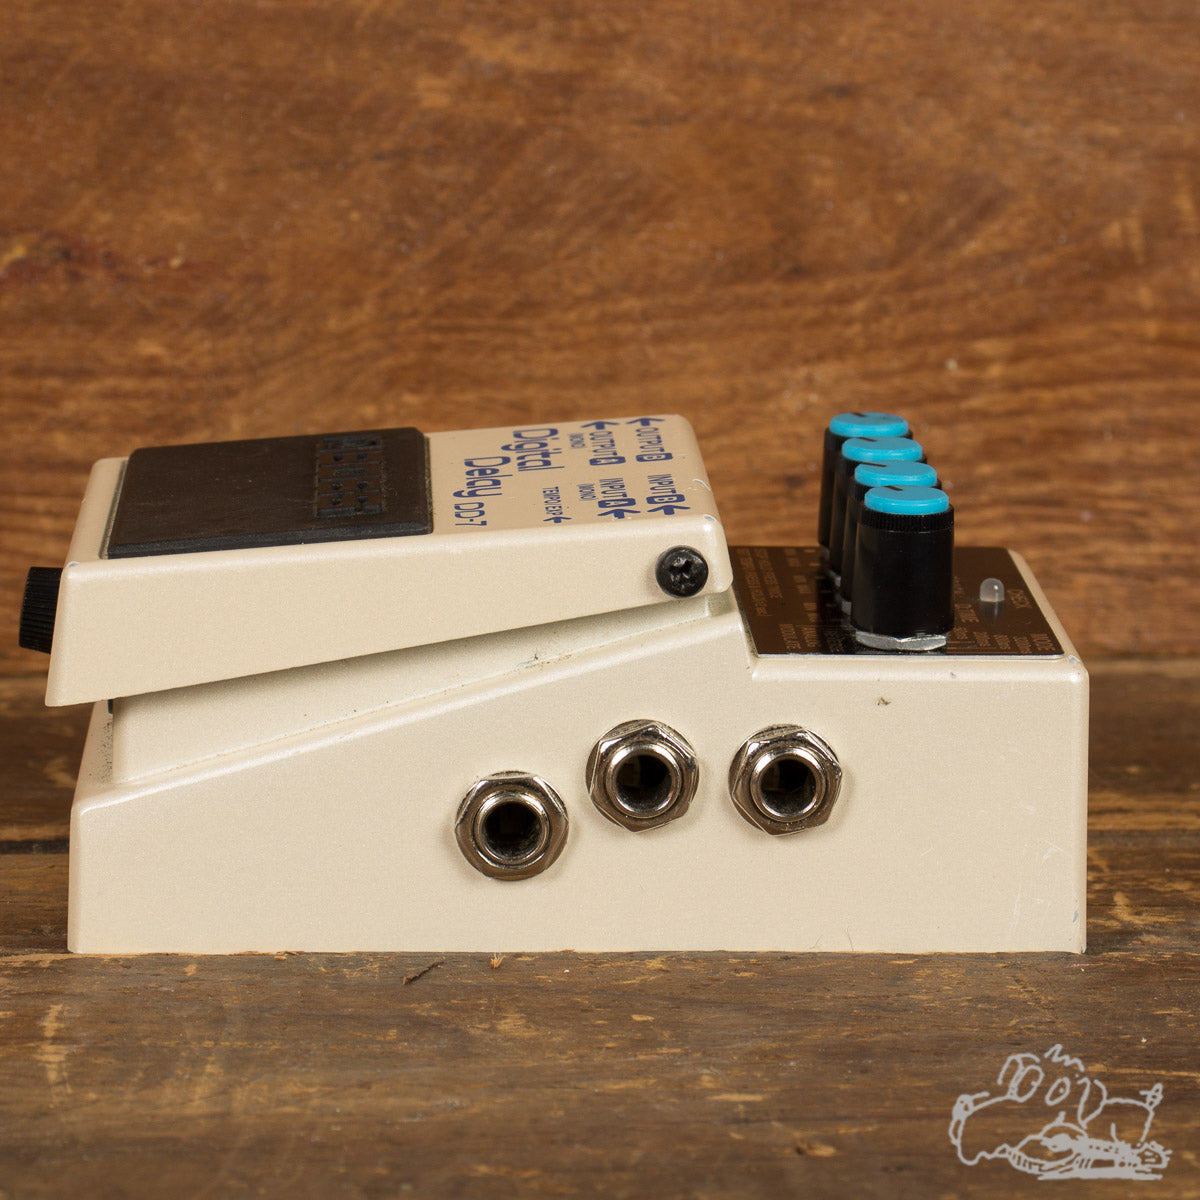 Previously Owned Boss DD-7 Digital Delay Pedal